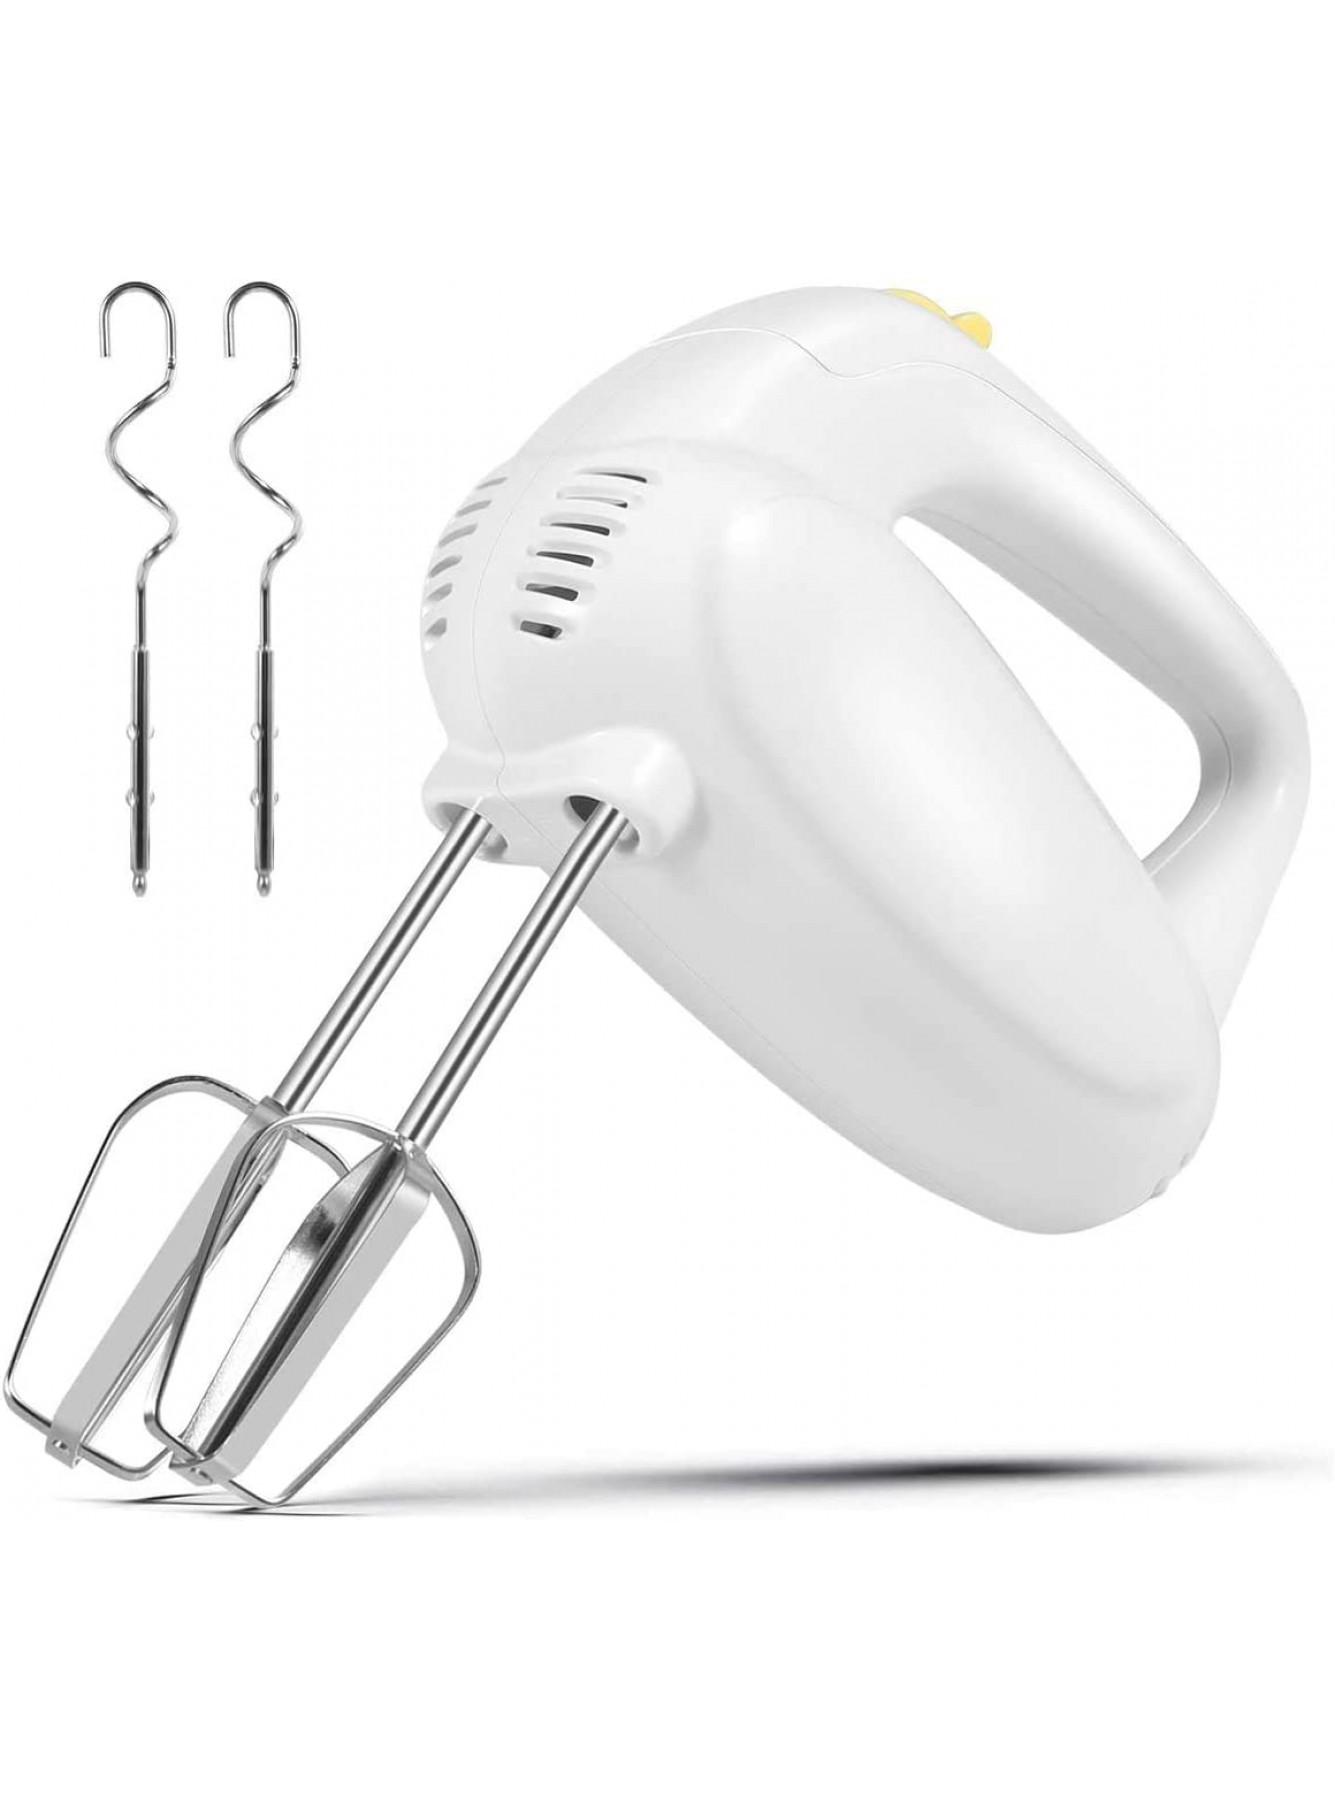 Hand Mixer Electric,5-Speed Hand Mixer Electric with Turbo Handheld Kitchen Mixer Electeic Beaters,4 Stainless Steel Accessories for Easy Whipping Mixing Cookies Brownies Cakes B08WWZ67FL